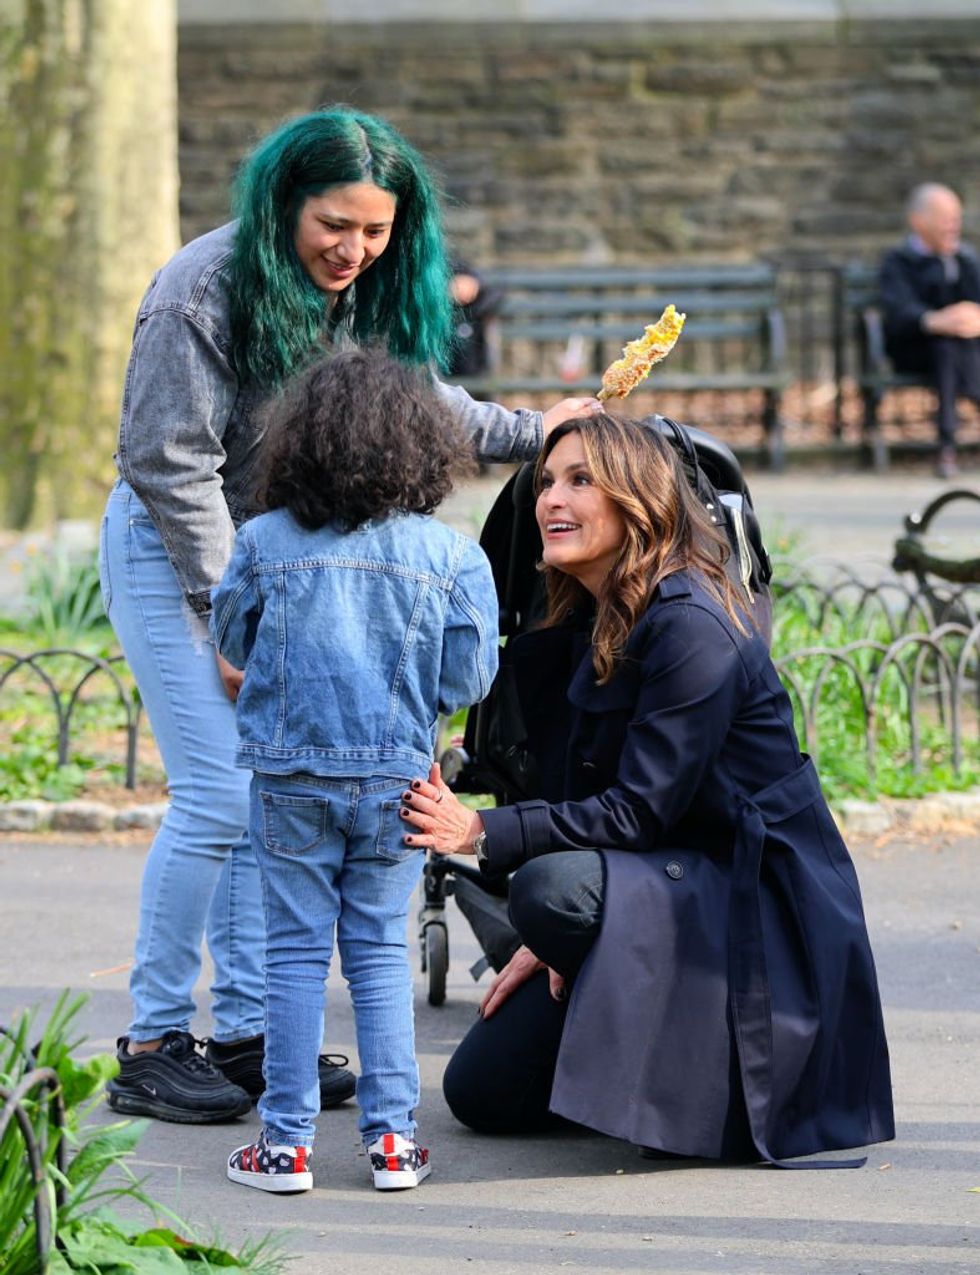 Mariska Hargitay assisting lost young girl and her mother while on set